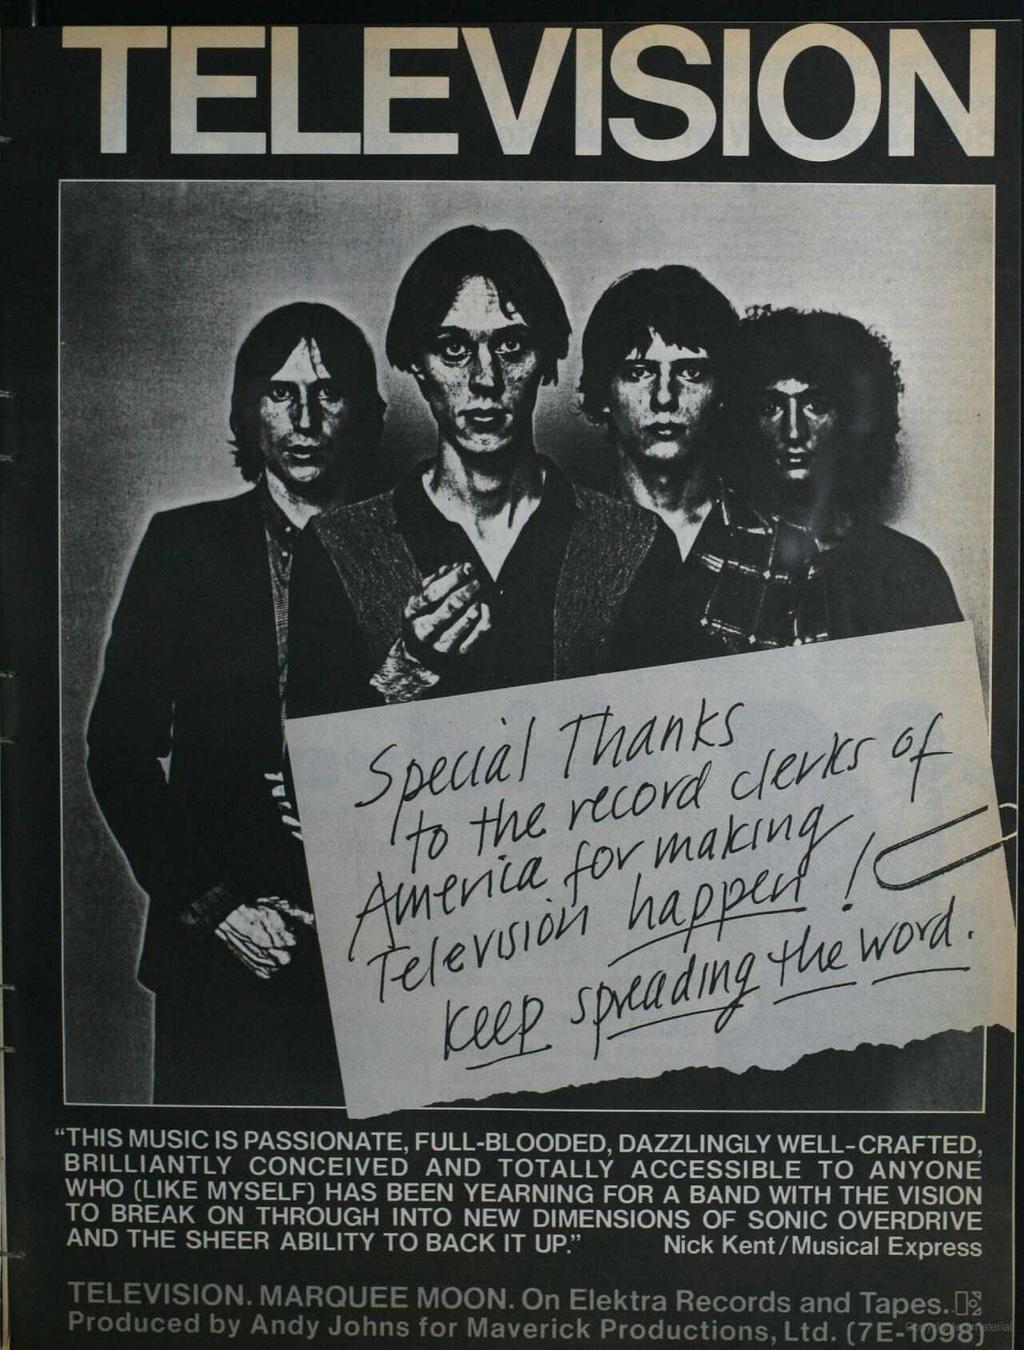 TELEVSON. MARQUEE MOON. On Elektra Records and Tapes. 7.: Produced by Andy Johns for Maverick Productions, Ltd. (7E-098) www.americanradiohistory.